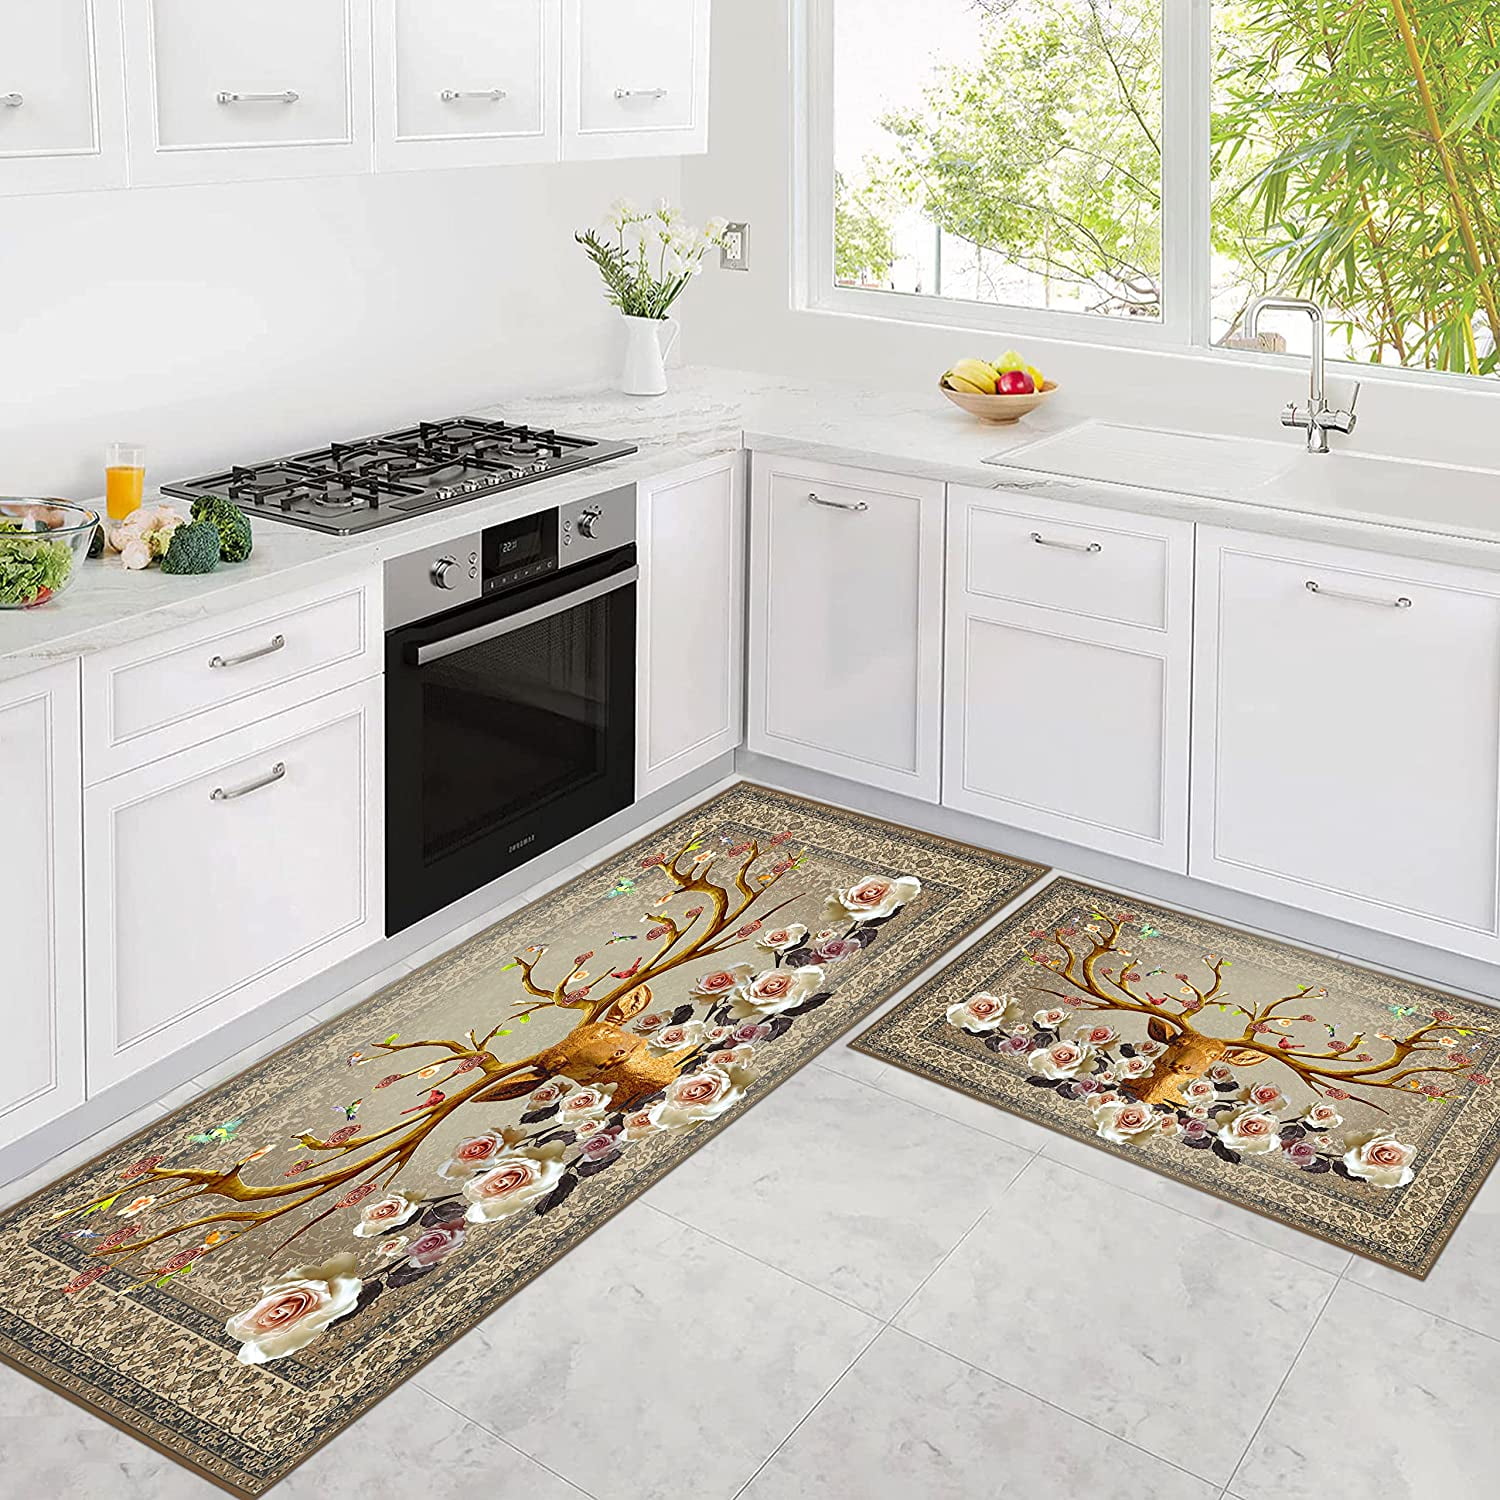 famibay Boho Kitchen Mats for Floor 2 Piece, Cushioned Kitchen